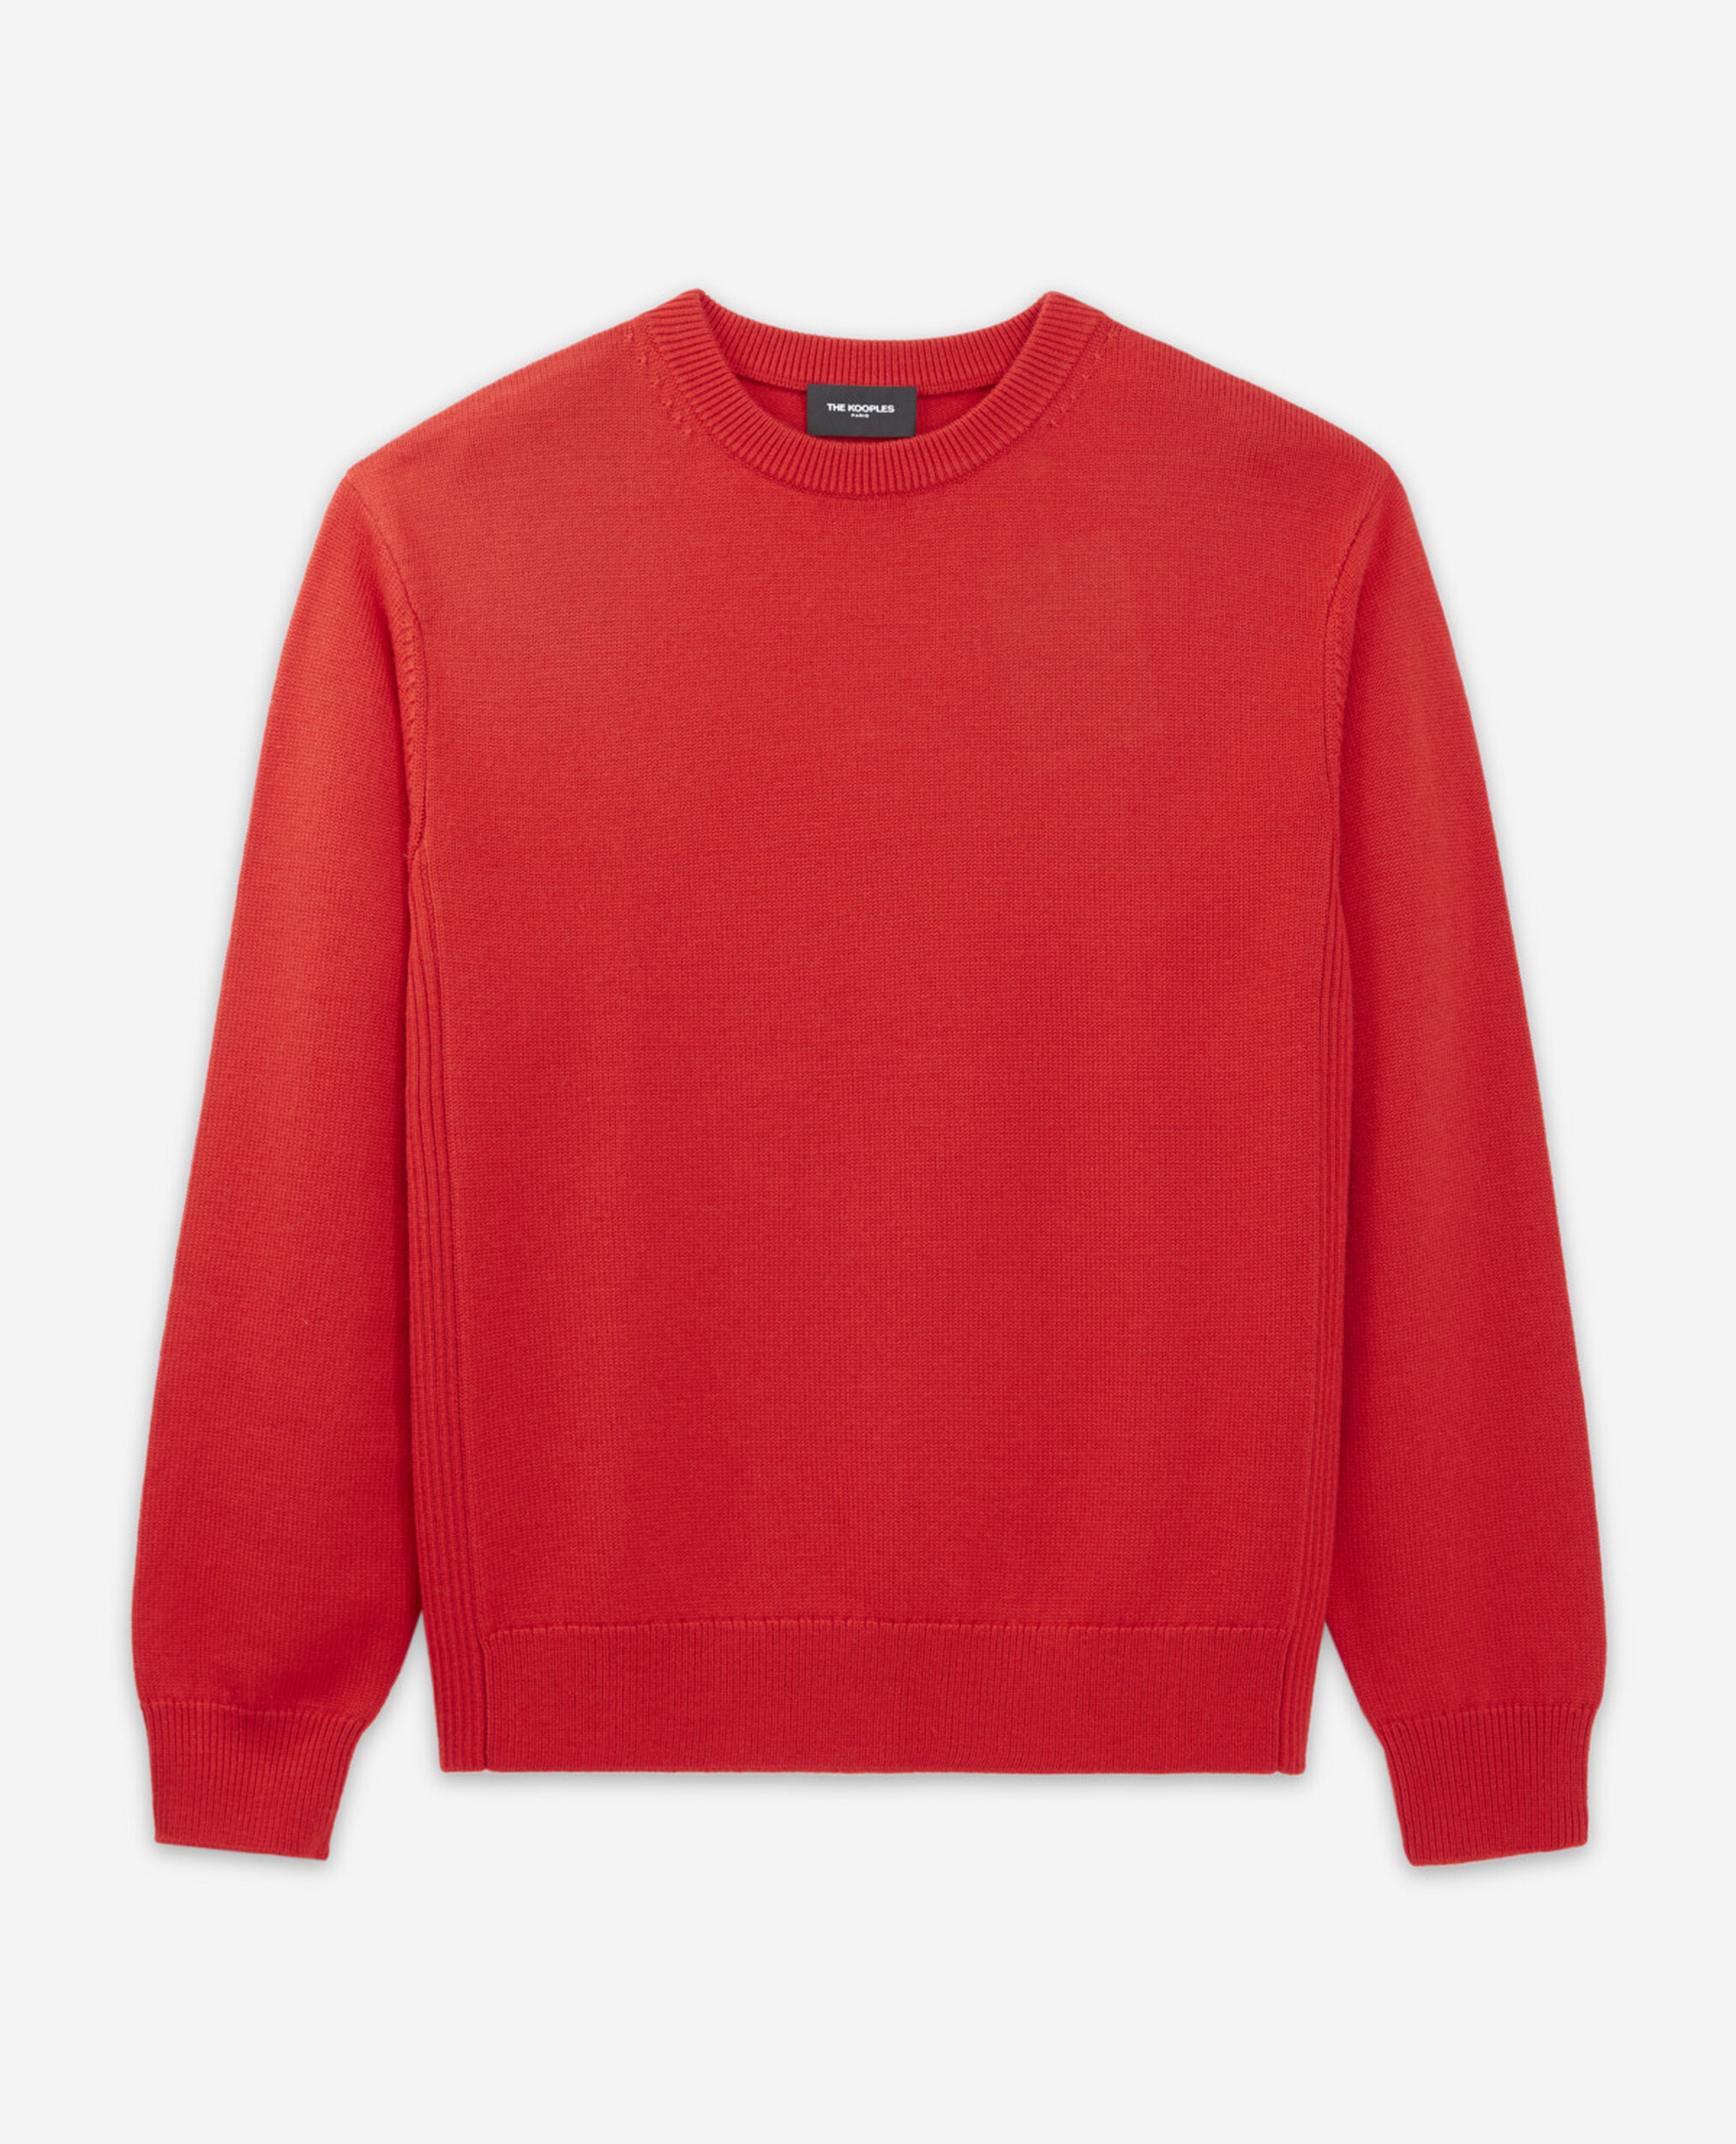 Pull laine rouge col rond coupe classique, RED, hi-res image number null